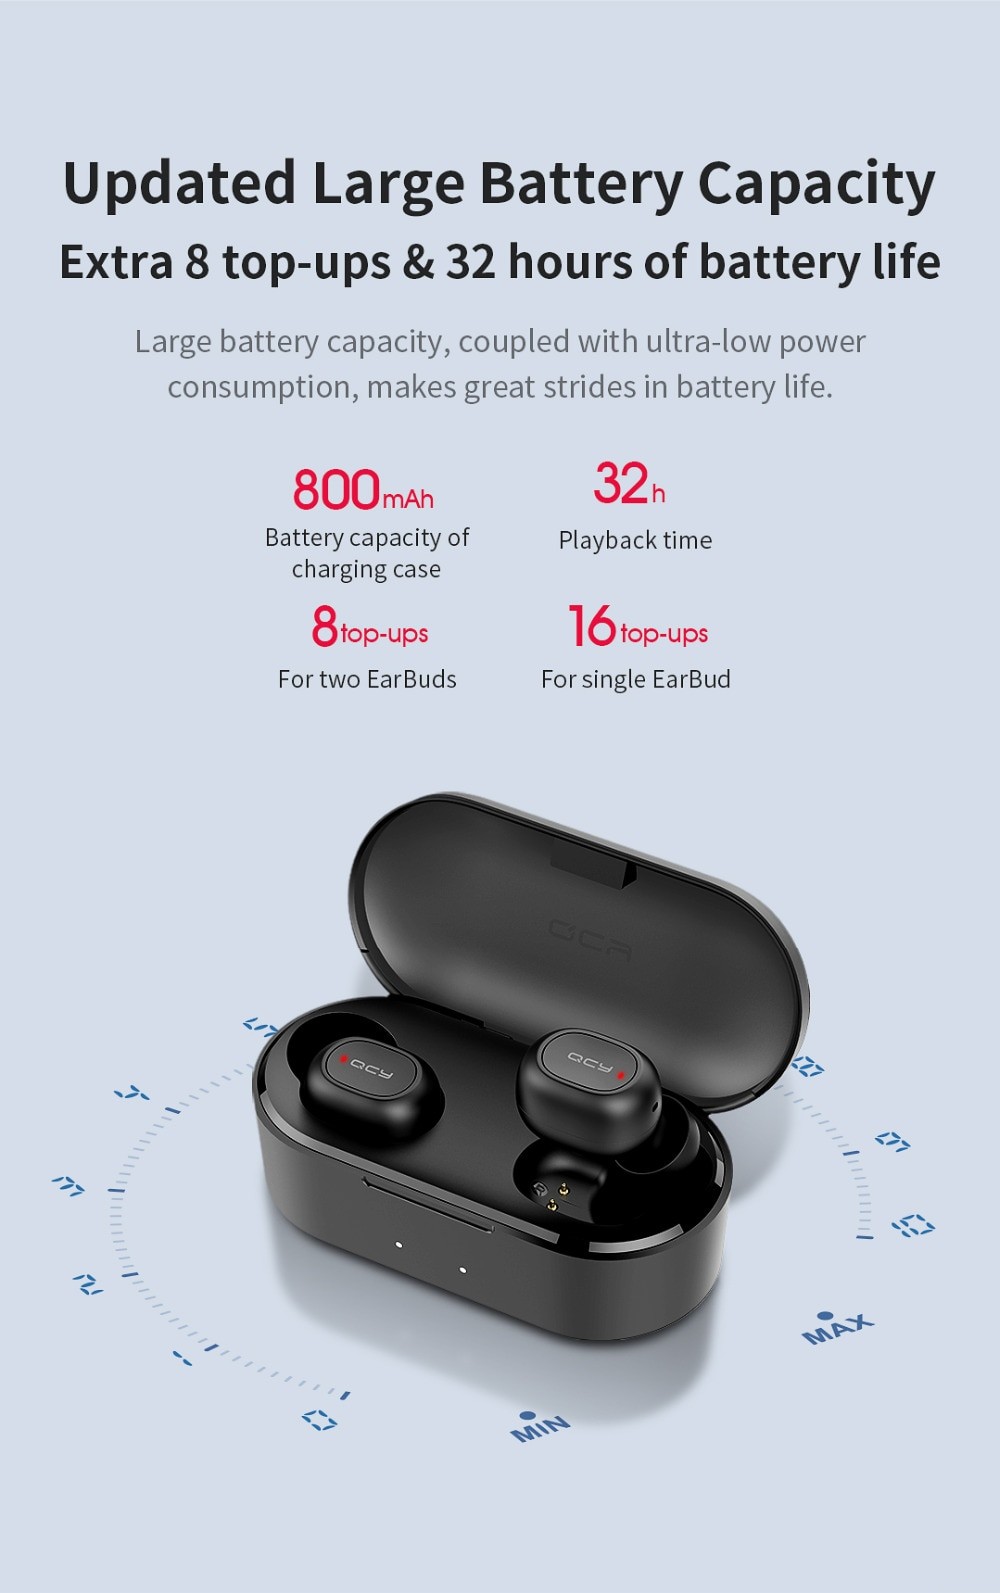 Dual Microphone Bluetooth Earphones with Charging Box